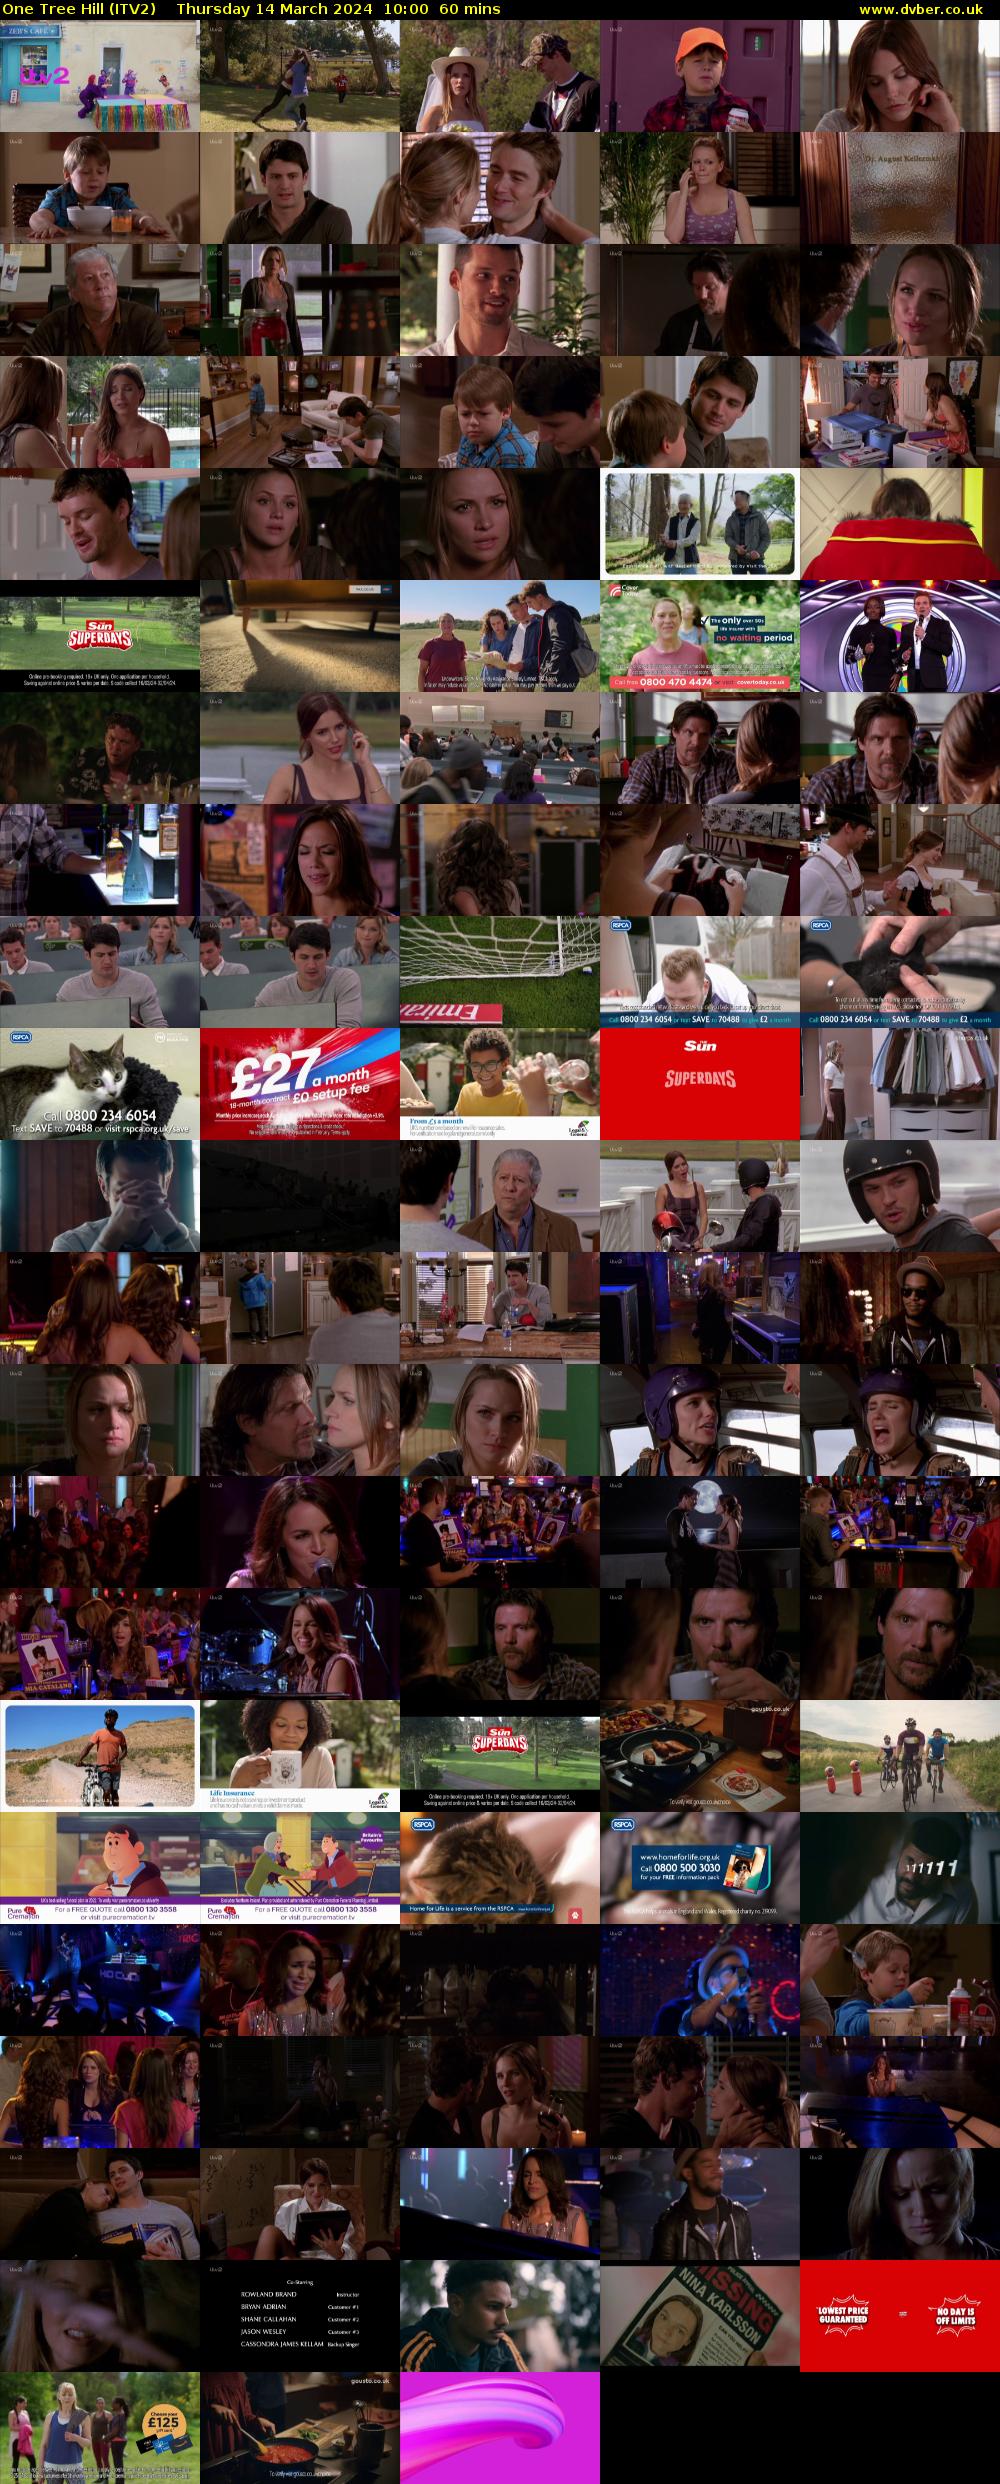 One Tree Hill (ITV2) Thursday 14 March 2024 10:00 - 11:00